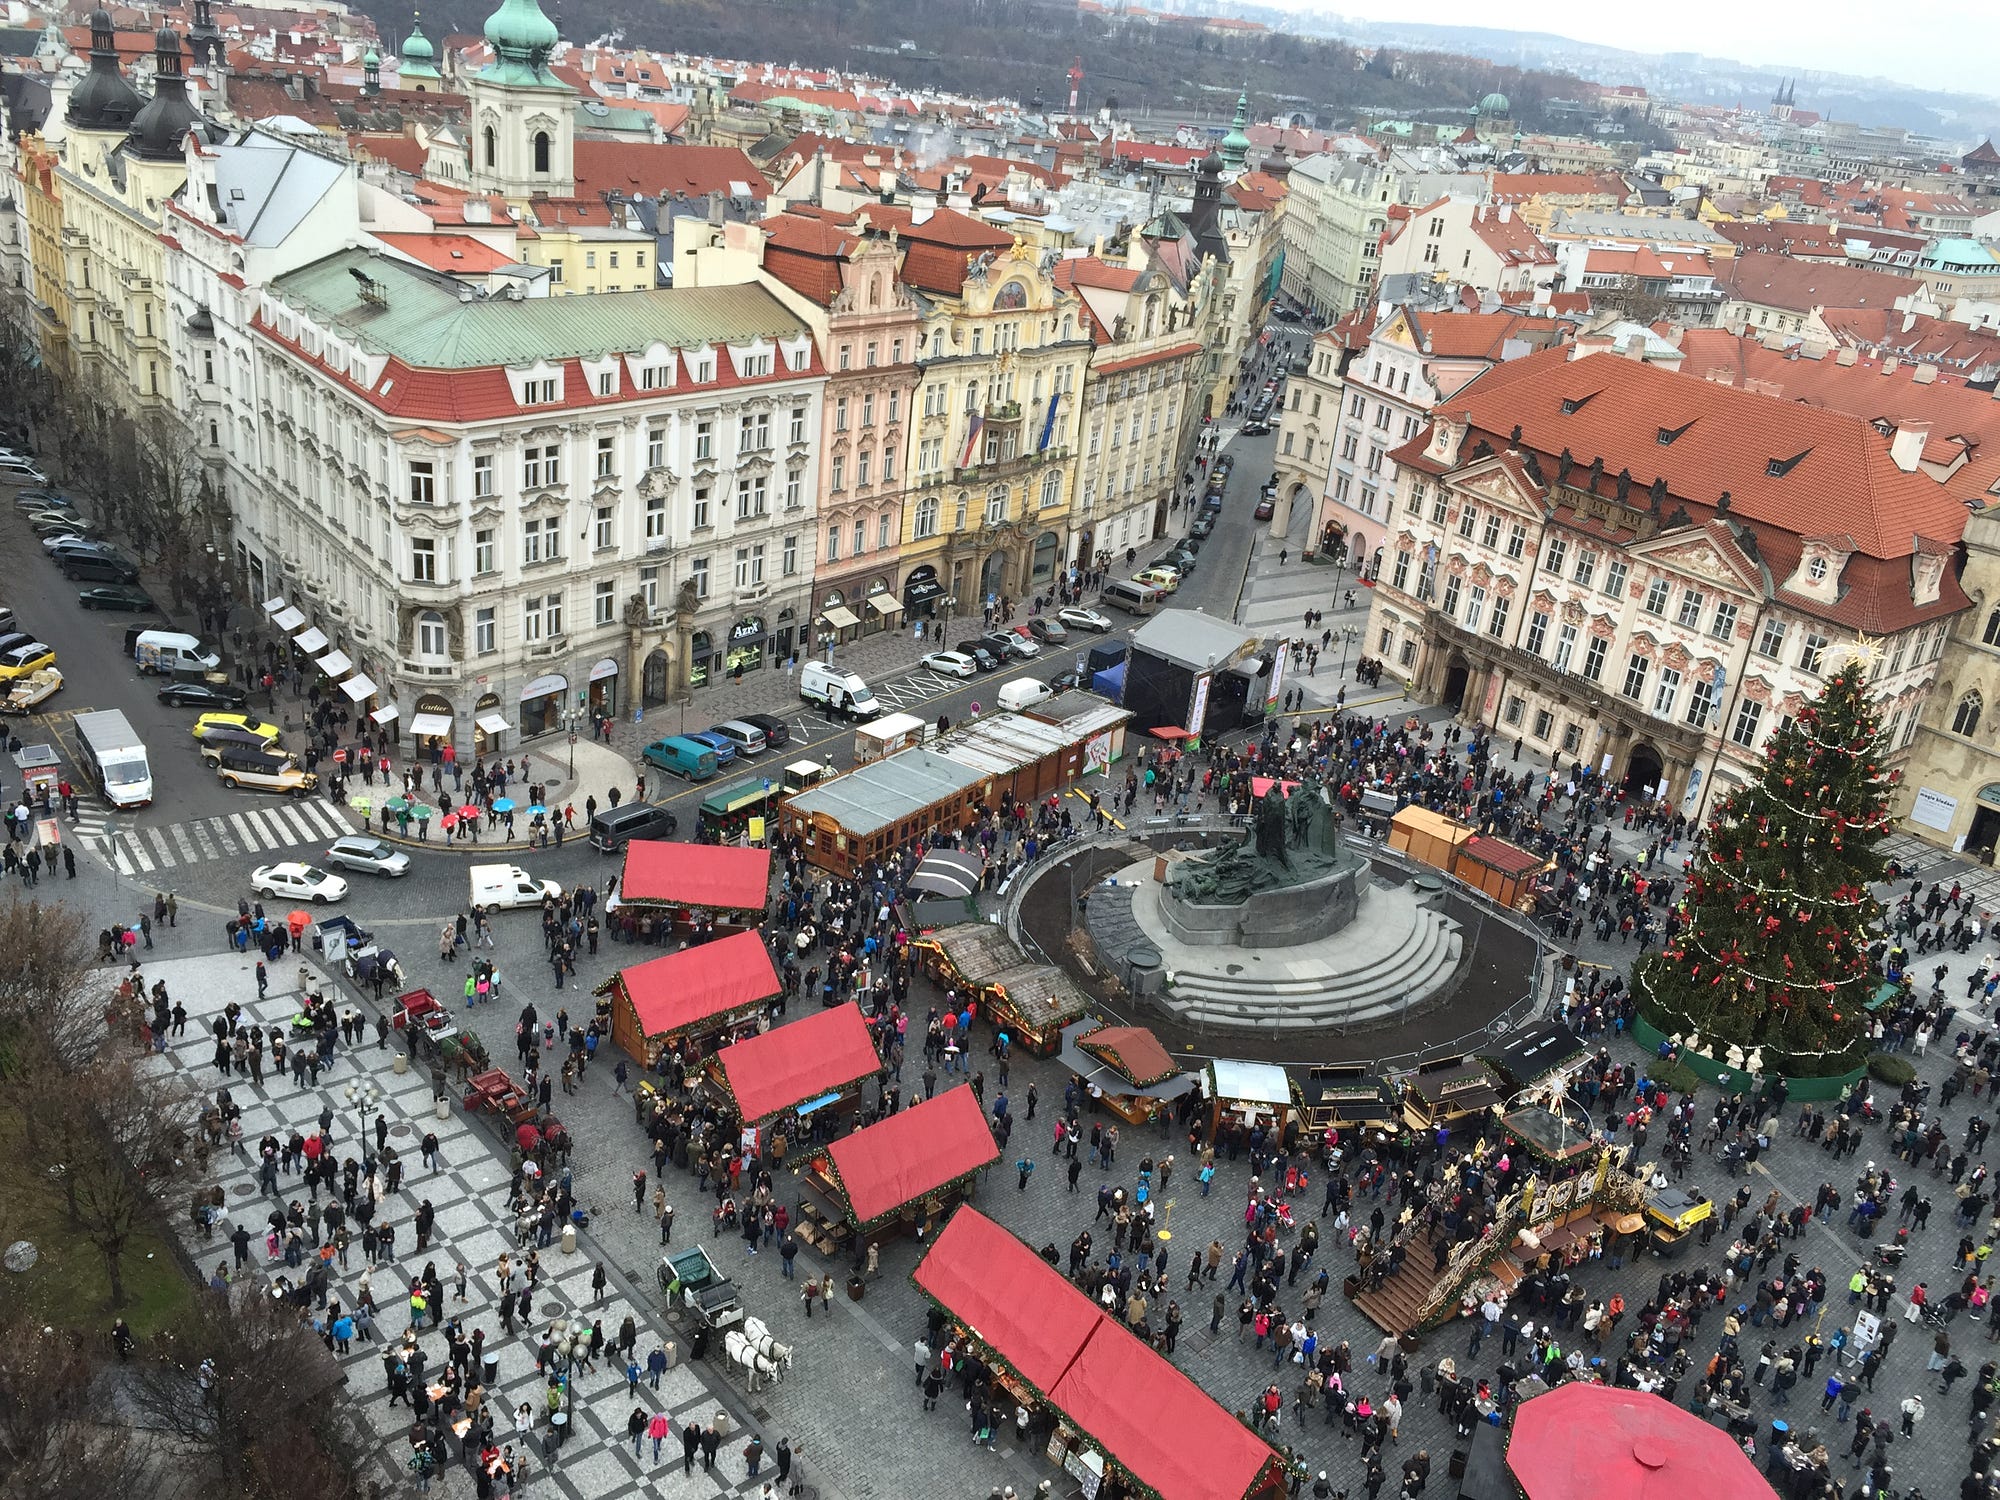 Christmas markets in the Old Town Square